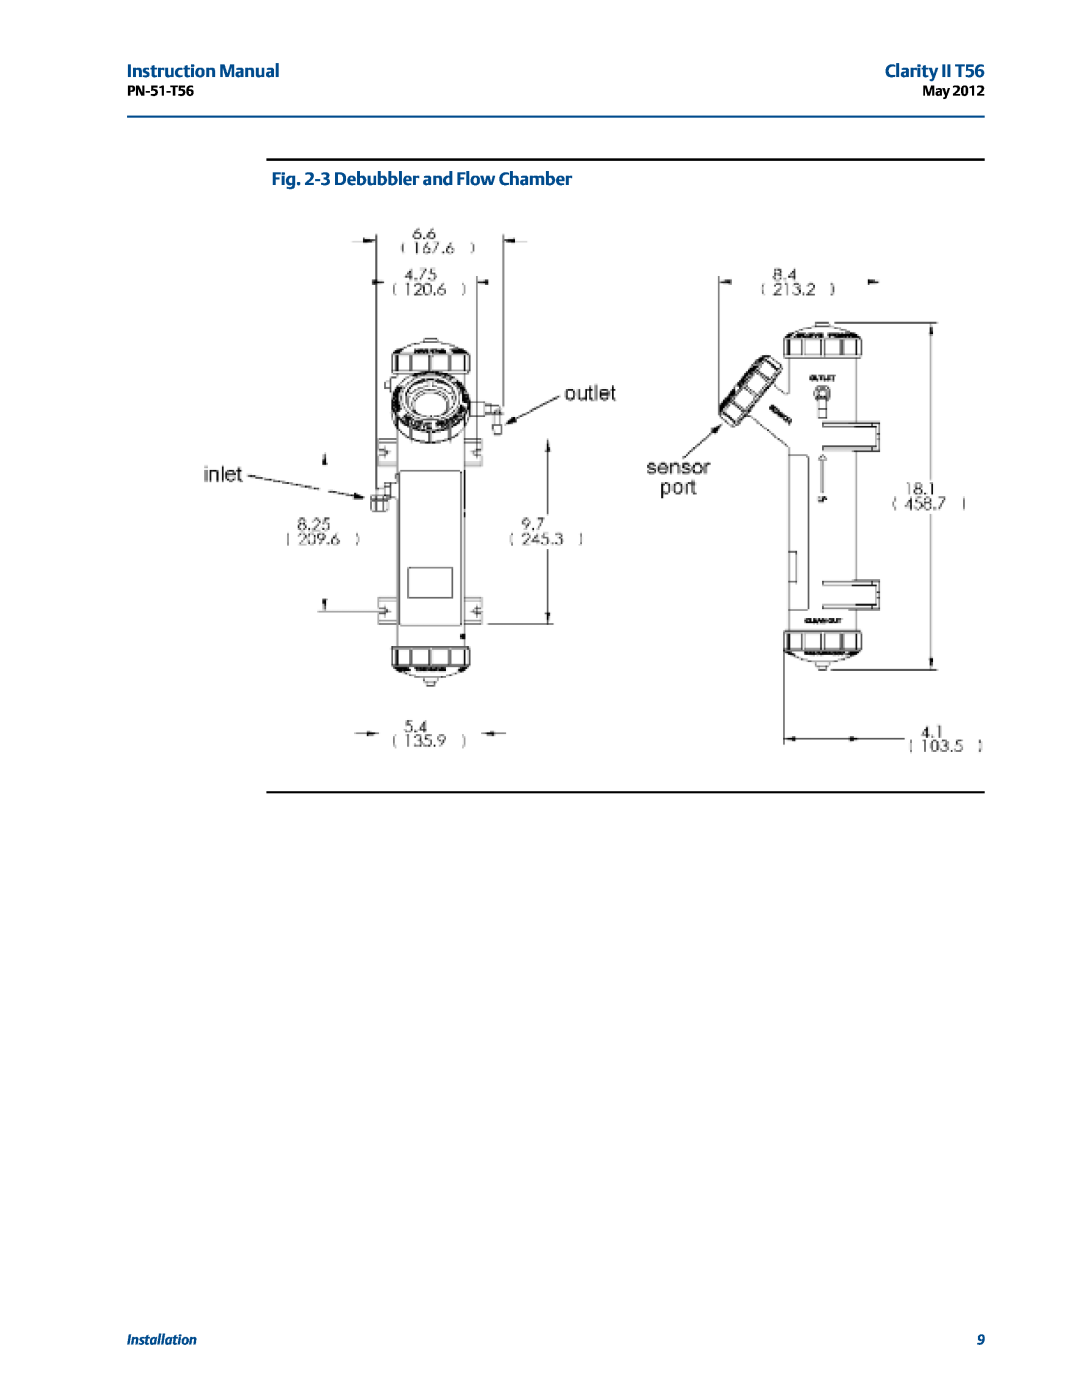 Emerson PN-51-T56 instruction manual 3 Debubbler and Flow Chamber, Clarity II T56, Installation 